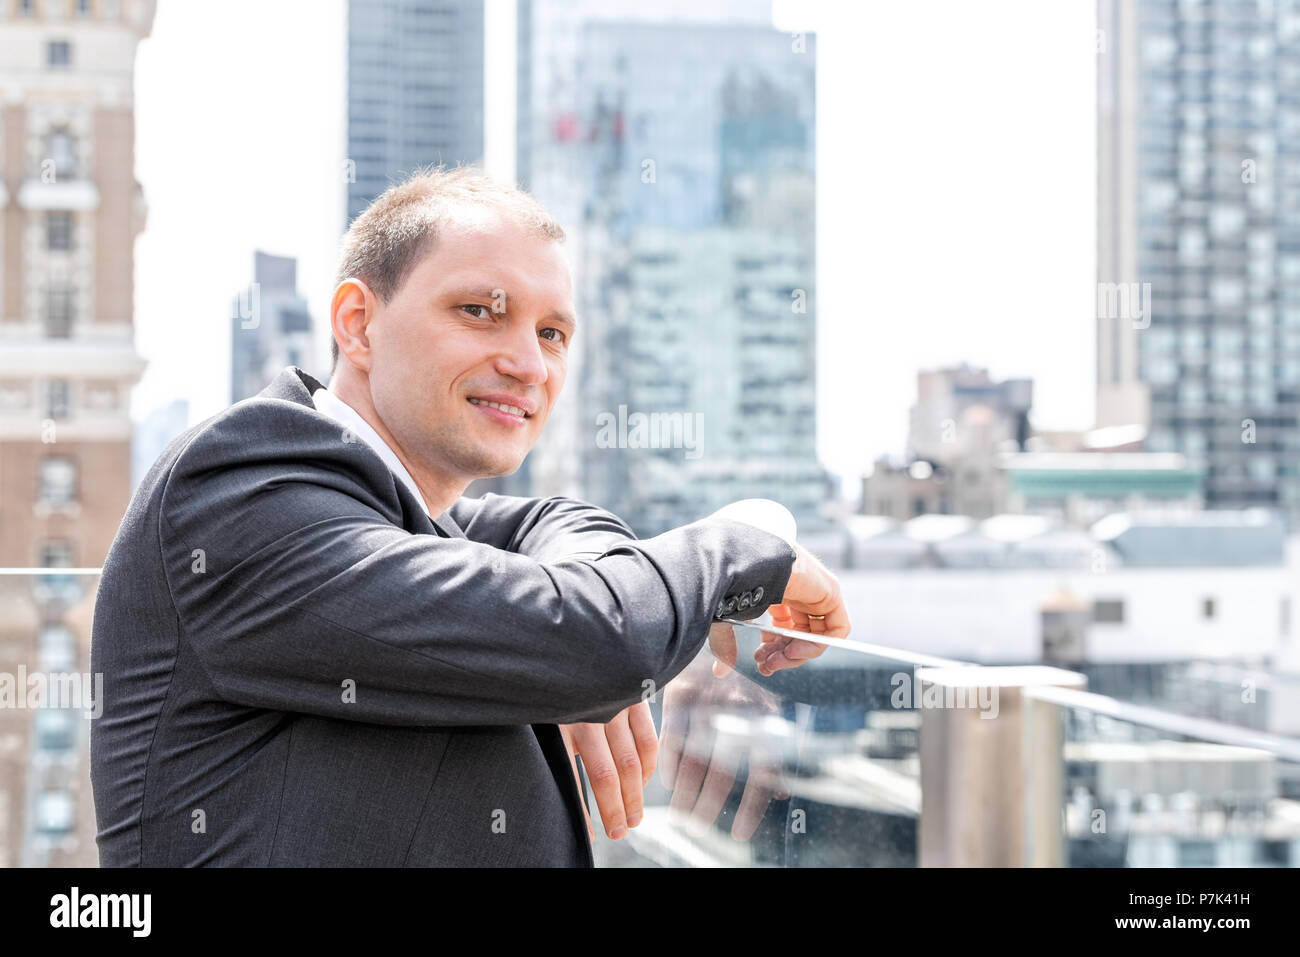 Handsome, attractive young side profile businessman closeup face portrait standing in suit, tie, looking at New York City cityscape skyline in Manhatt Stock Photo